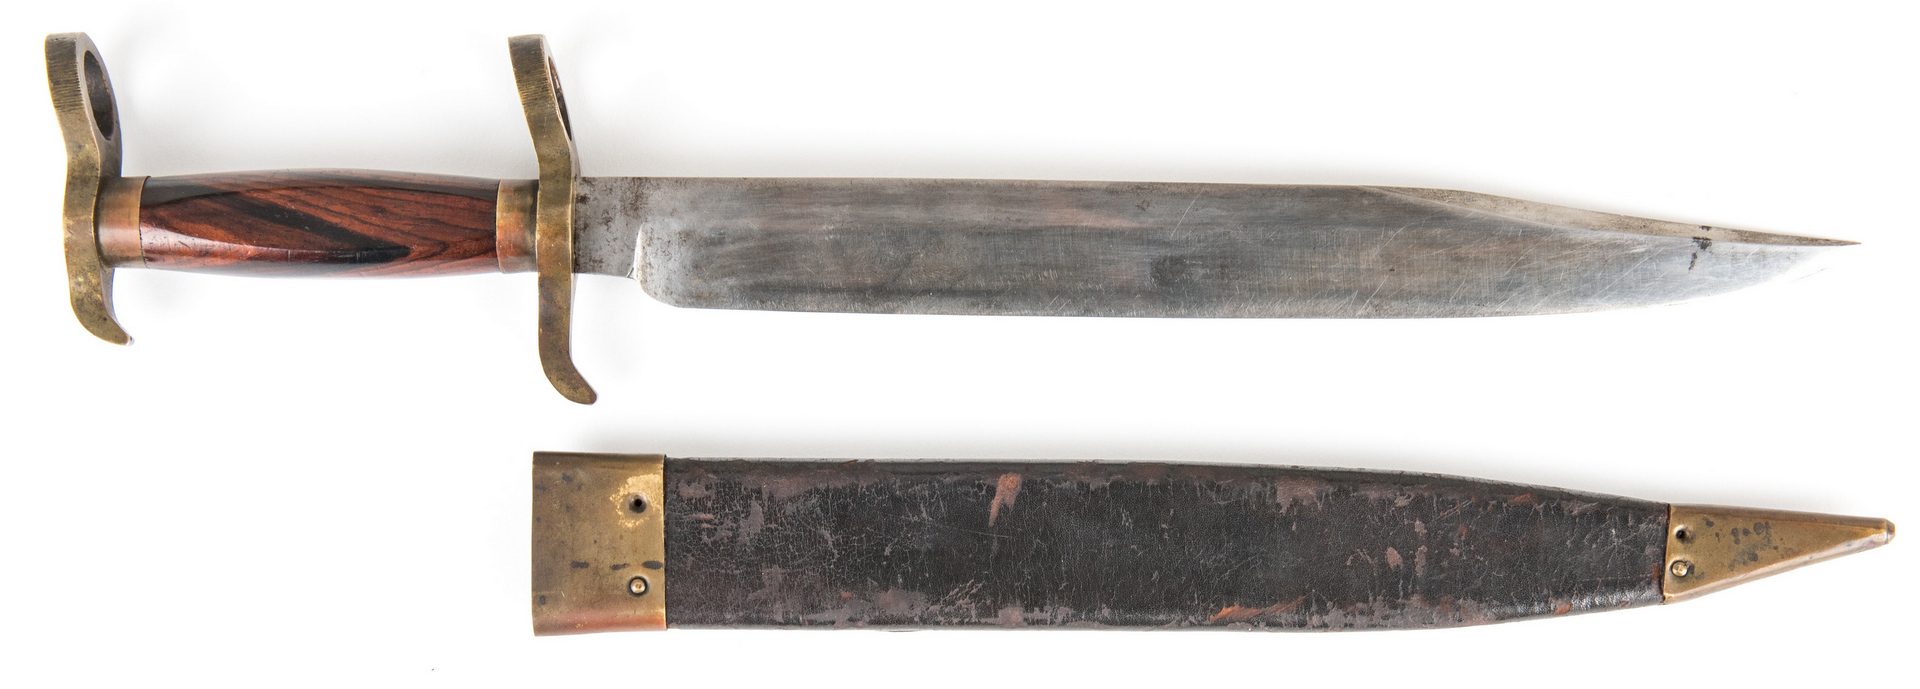 Lot 326: Confederate Bowie Bayonet Knife with Scabbard